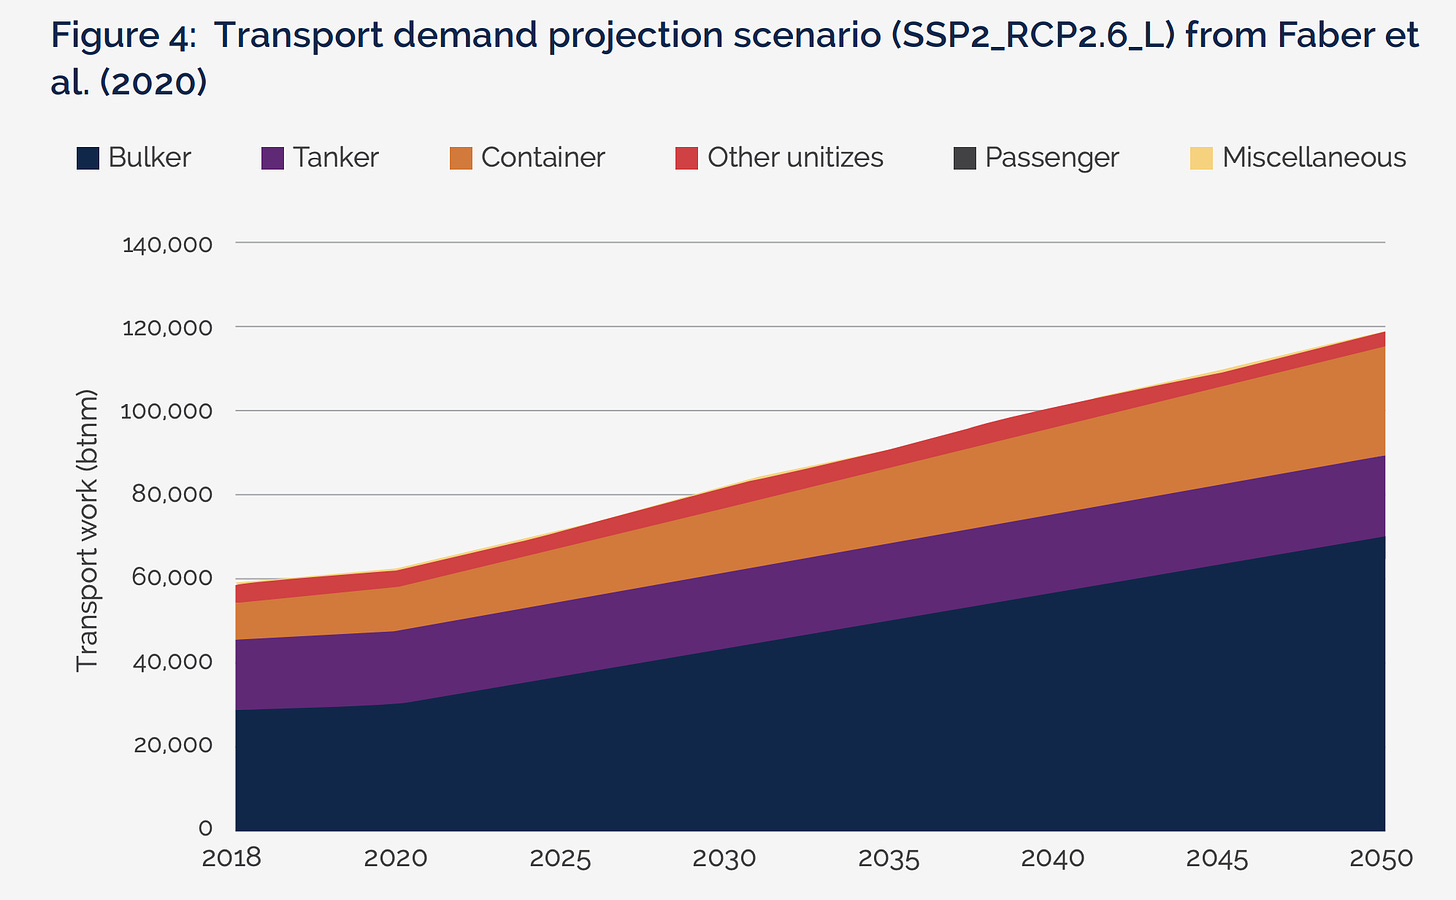 SBTi global demand projection for different maritime shipping segments